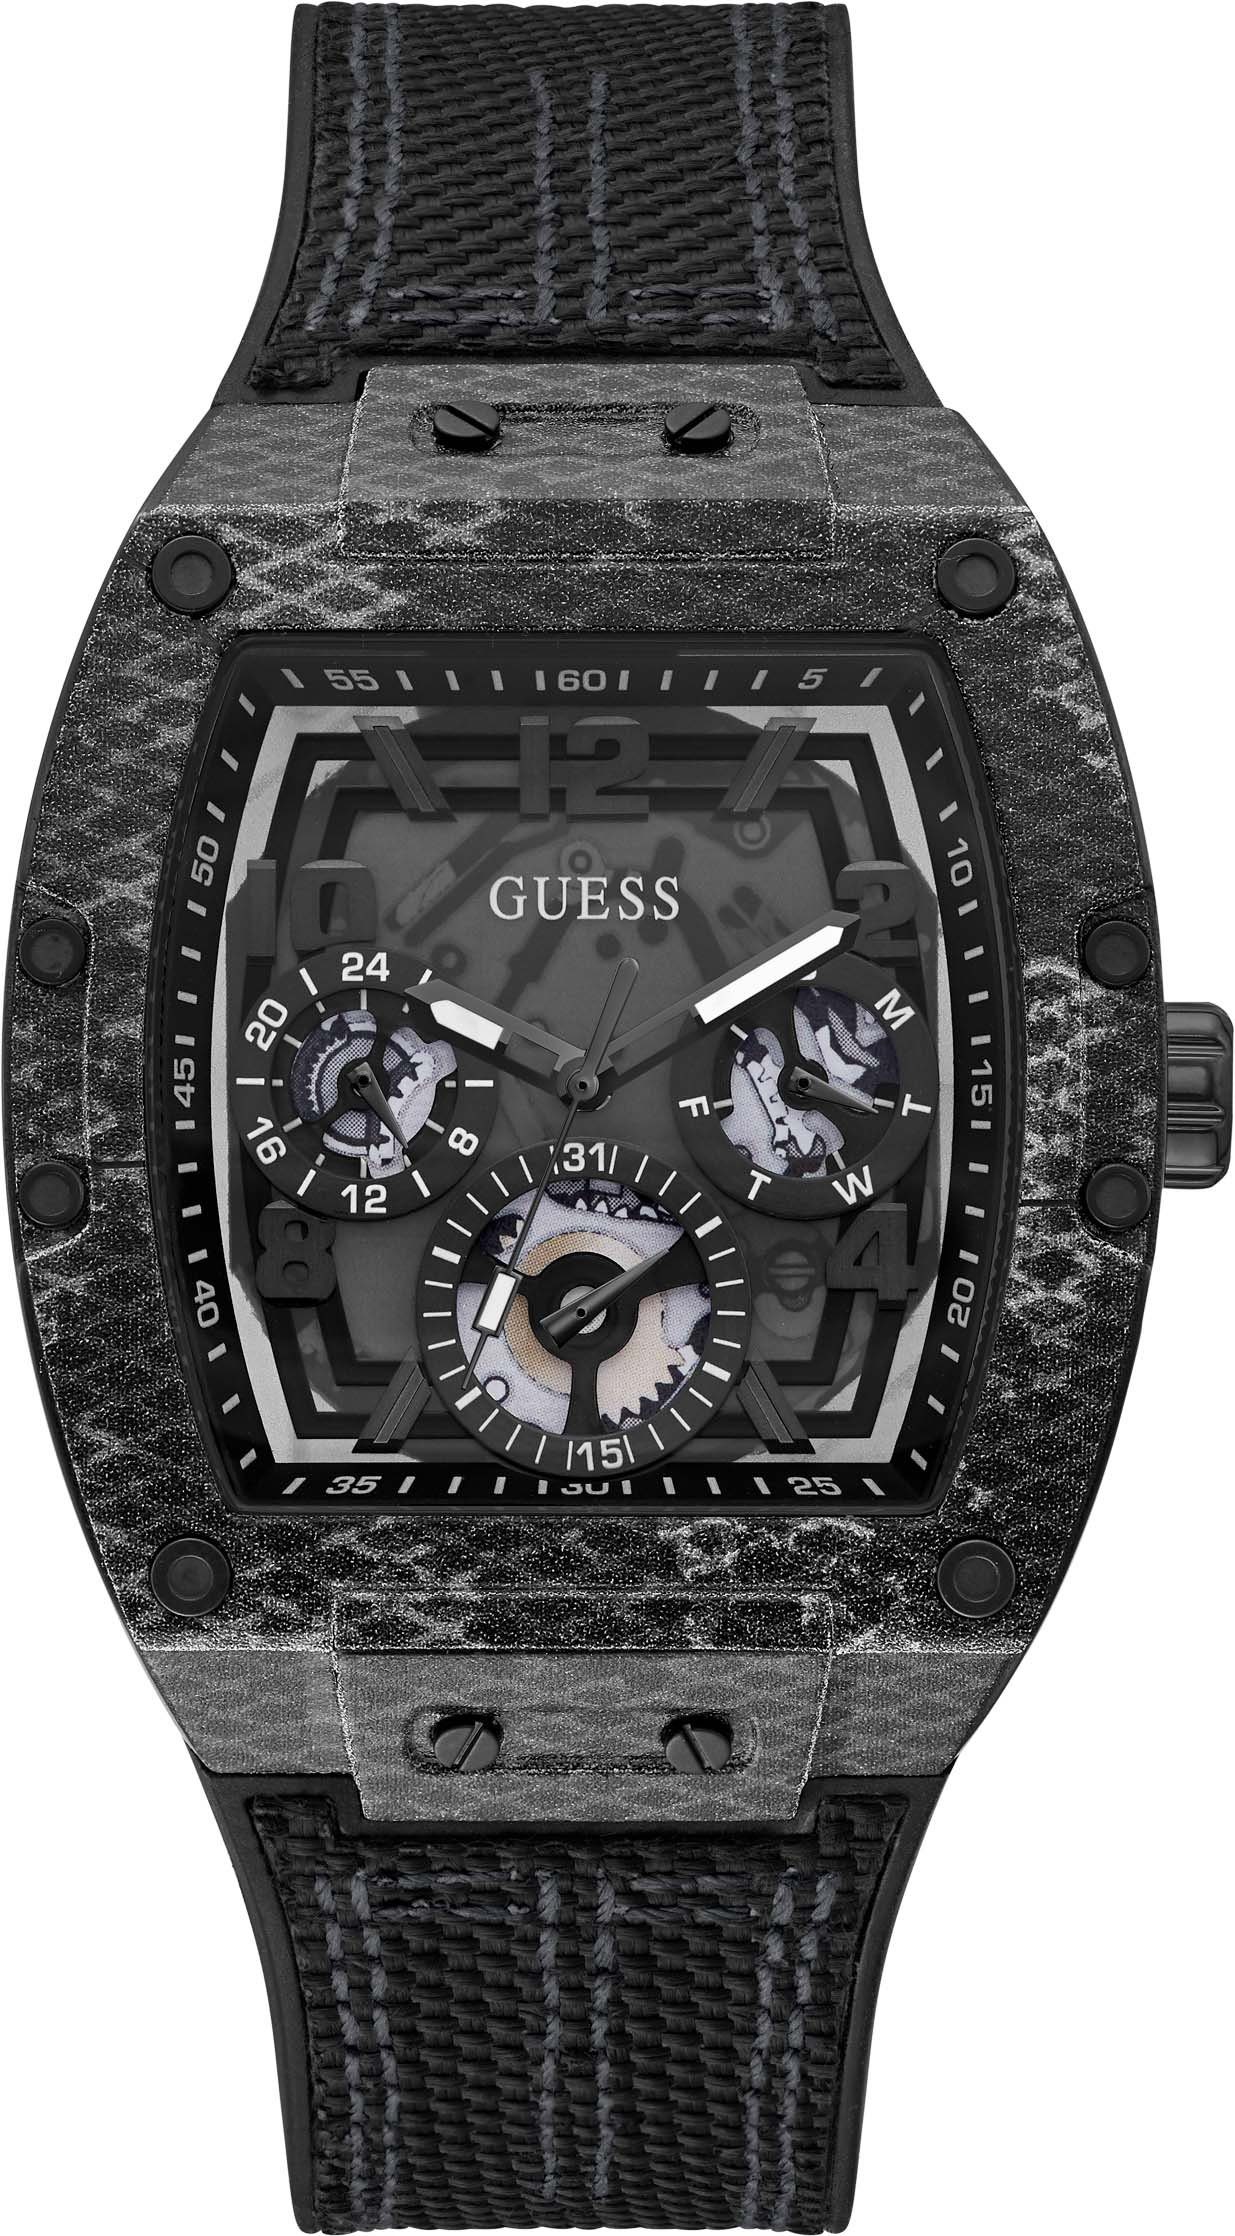 GW0422G2 Multifunktionsuhr Guess